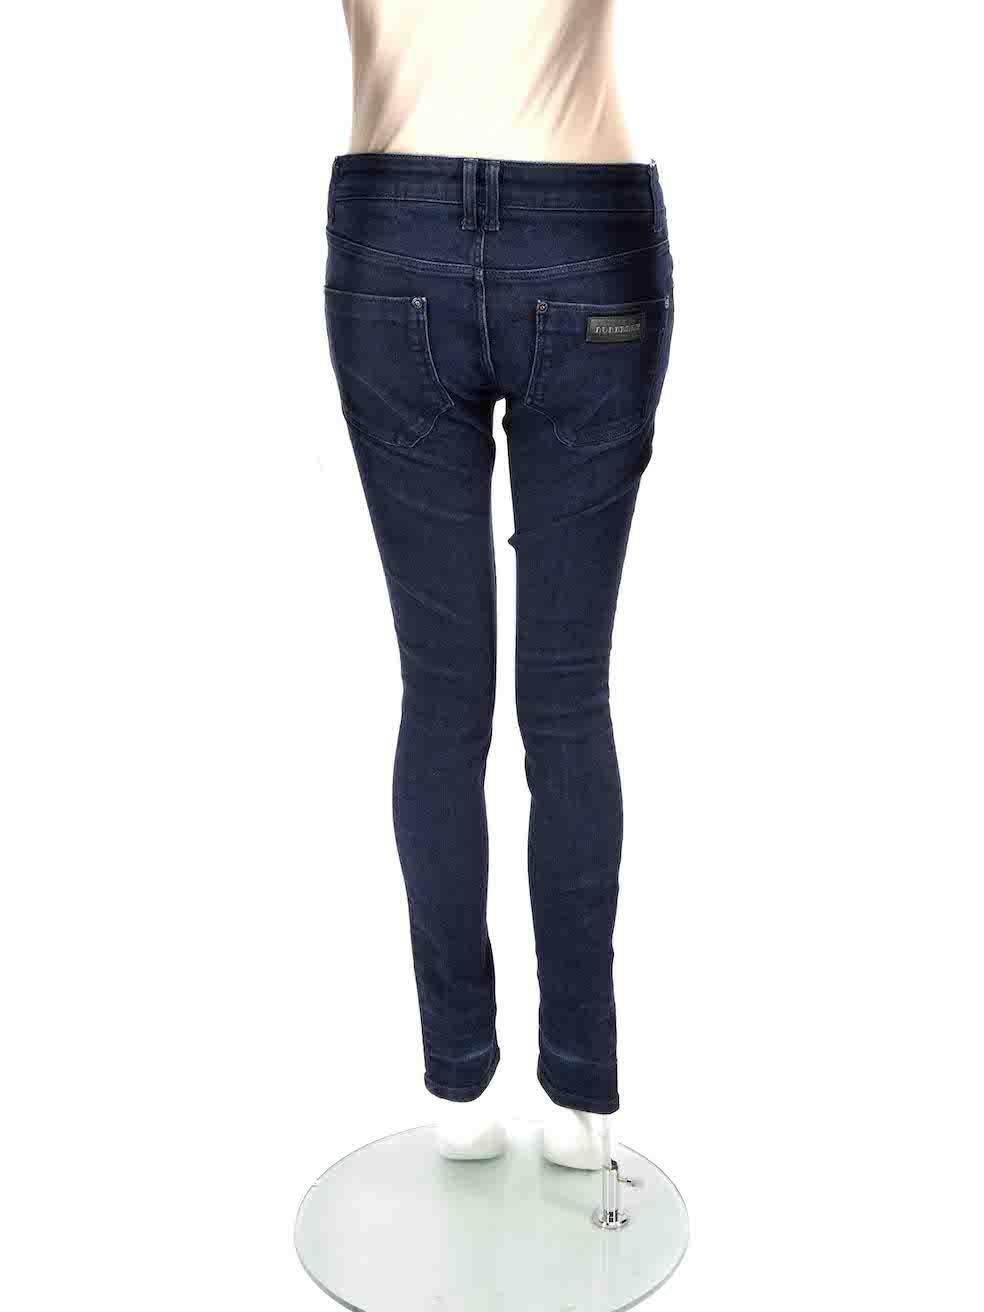 Burberry Blue Cotton Denim Skinny Jeans Size L In Good Condition For Sale In London, GB